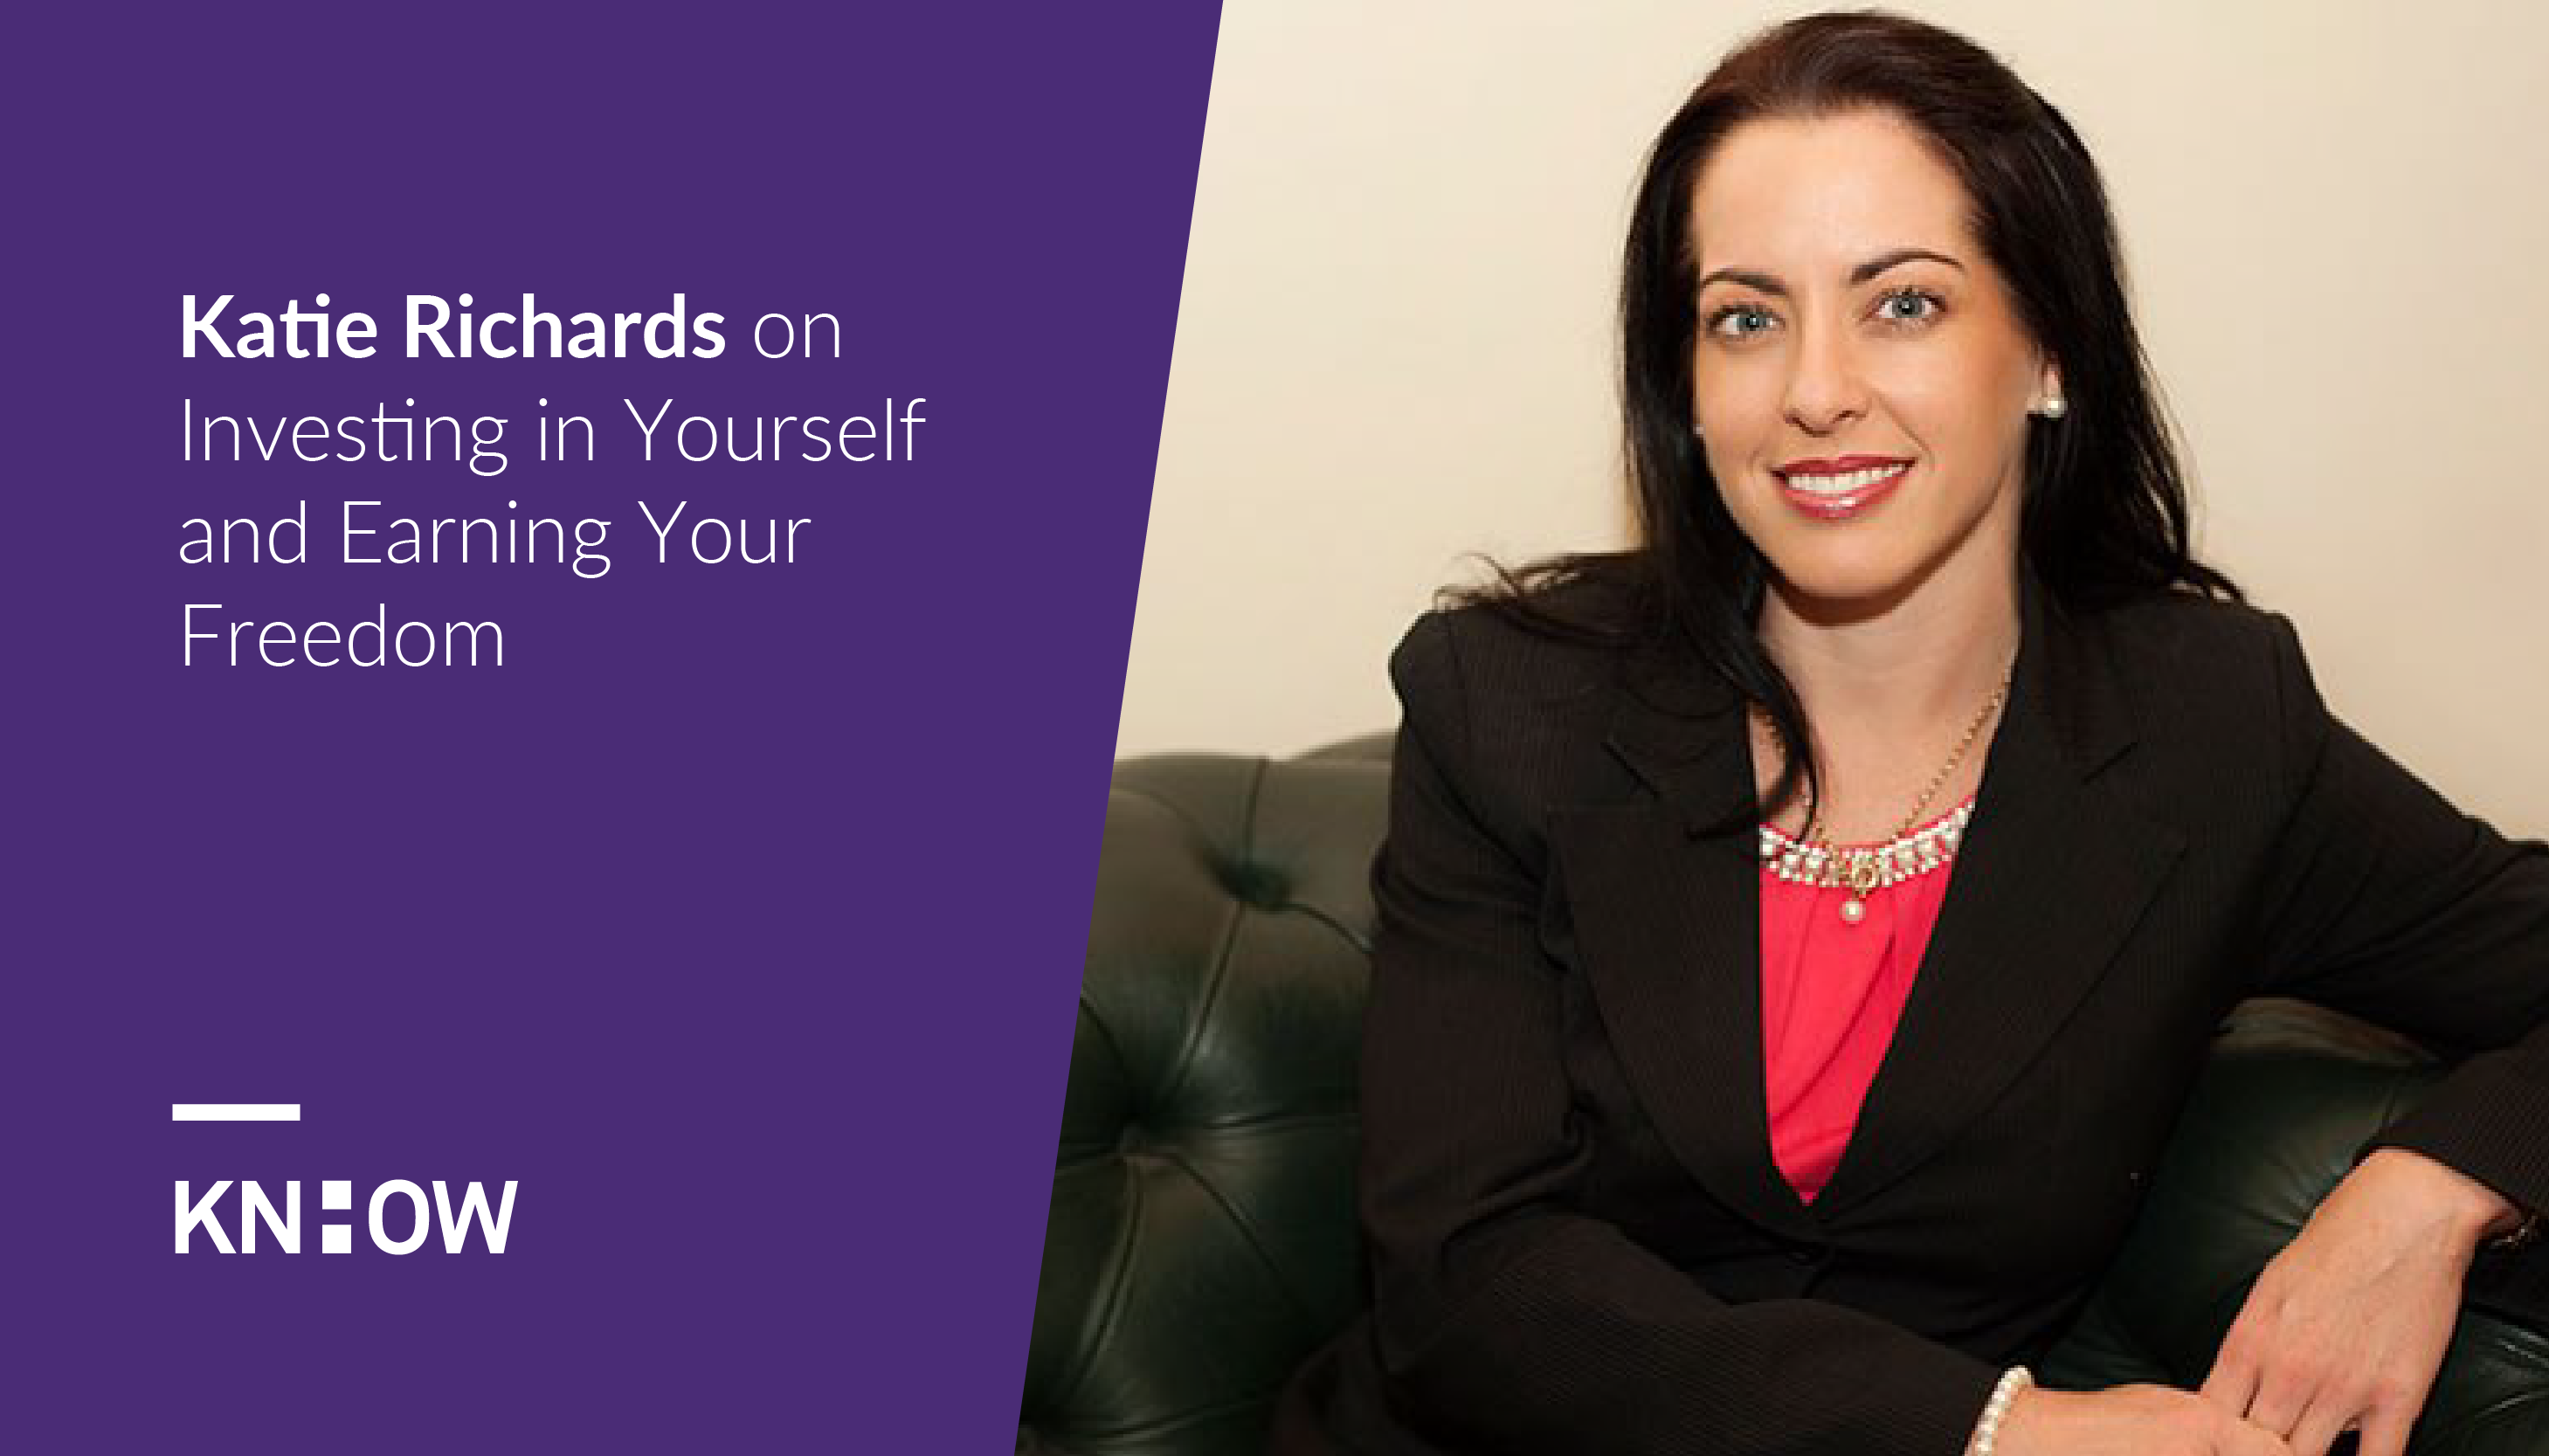 Katie Richards on Investing in Yourself and Earning Your Freedom